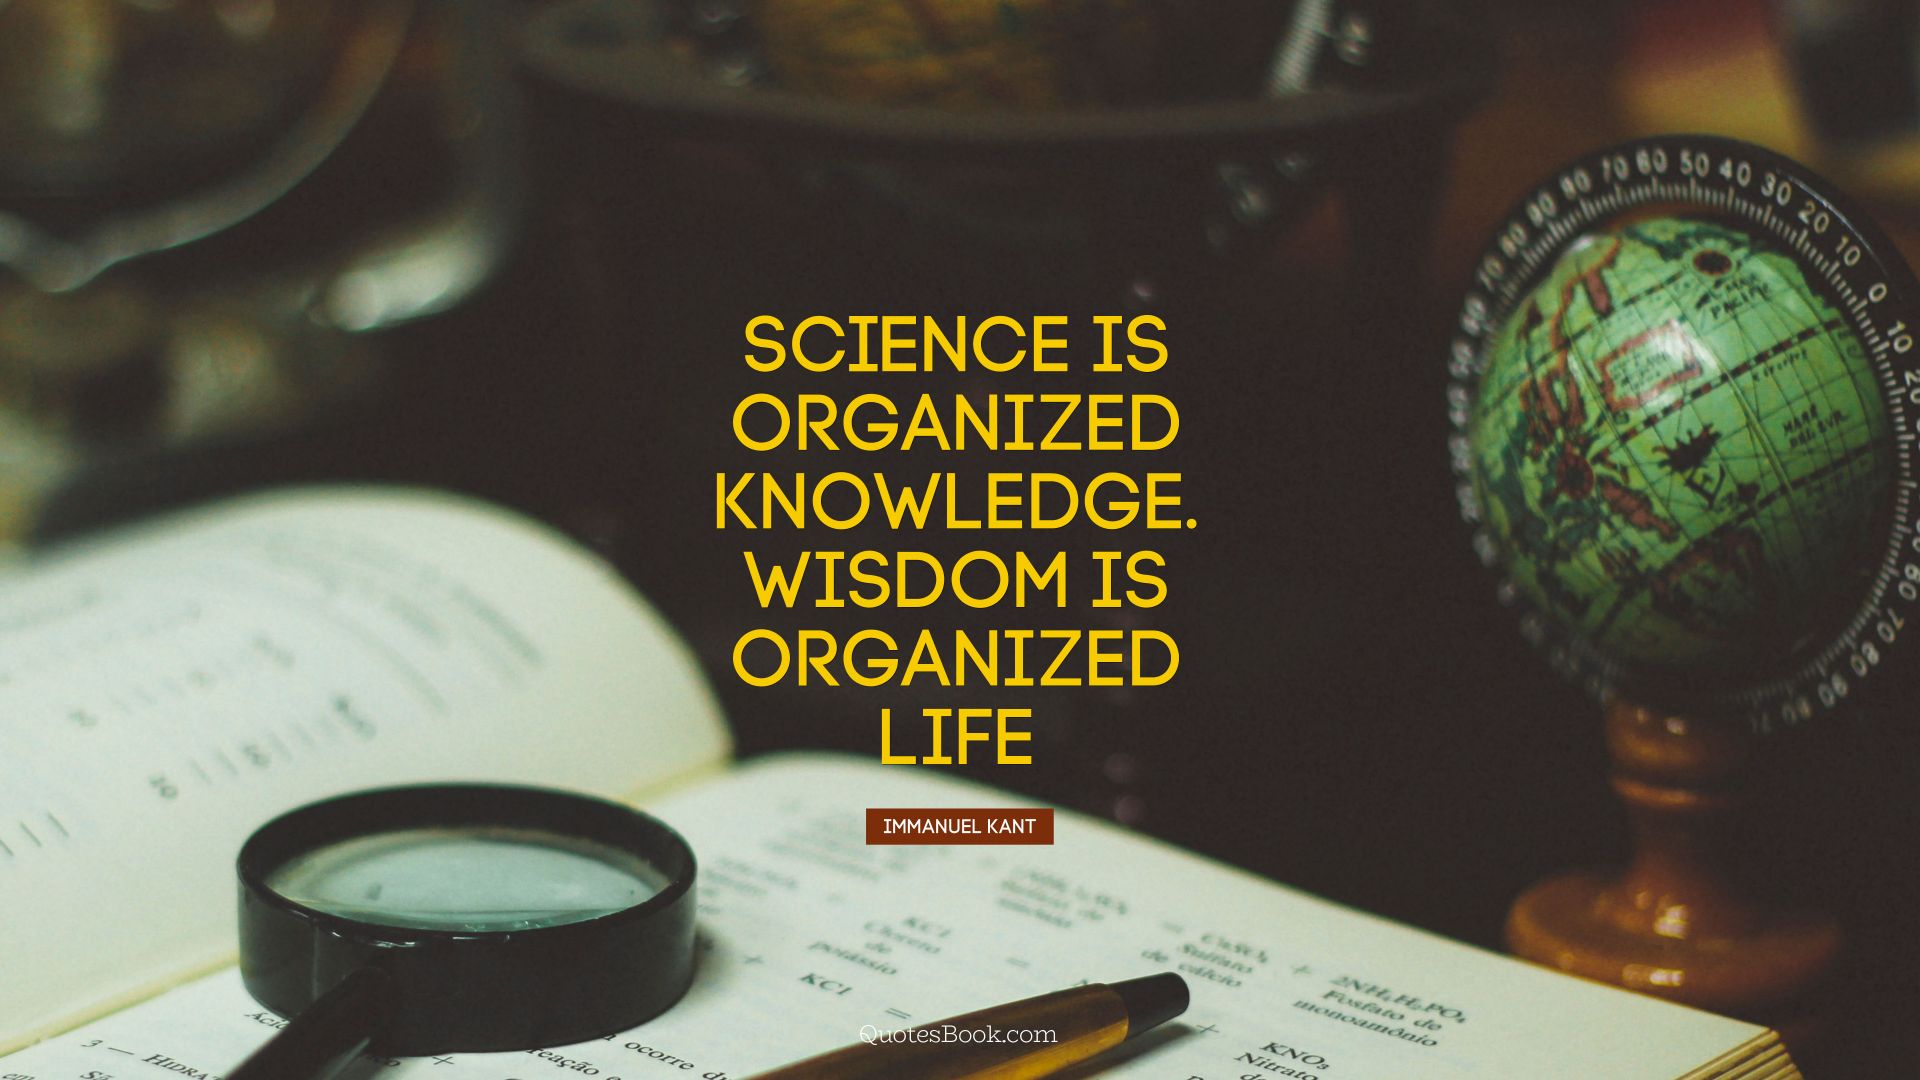 Science is organized knowledge. Wisdom is organized life. - Quote by Immanuel Kant